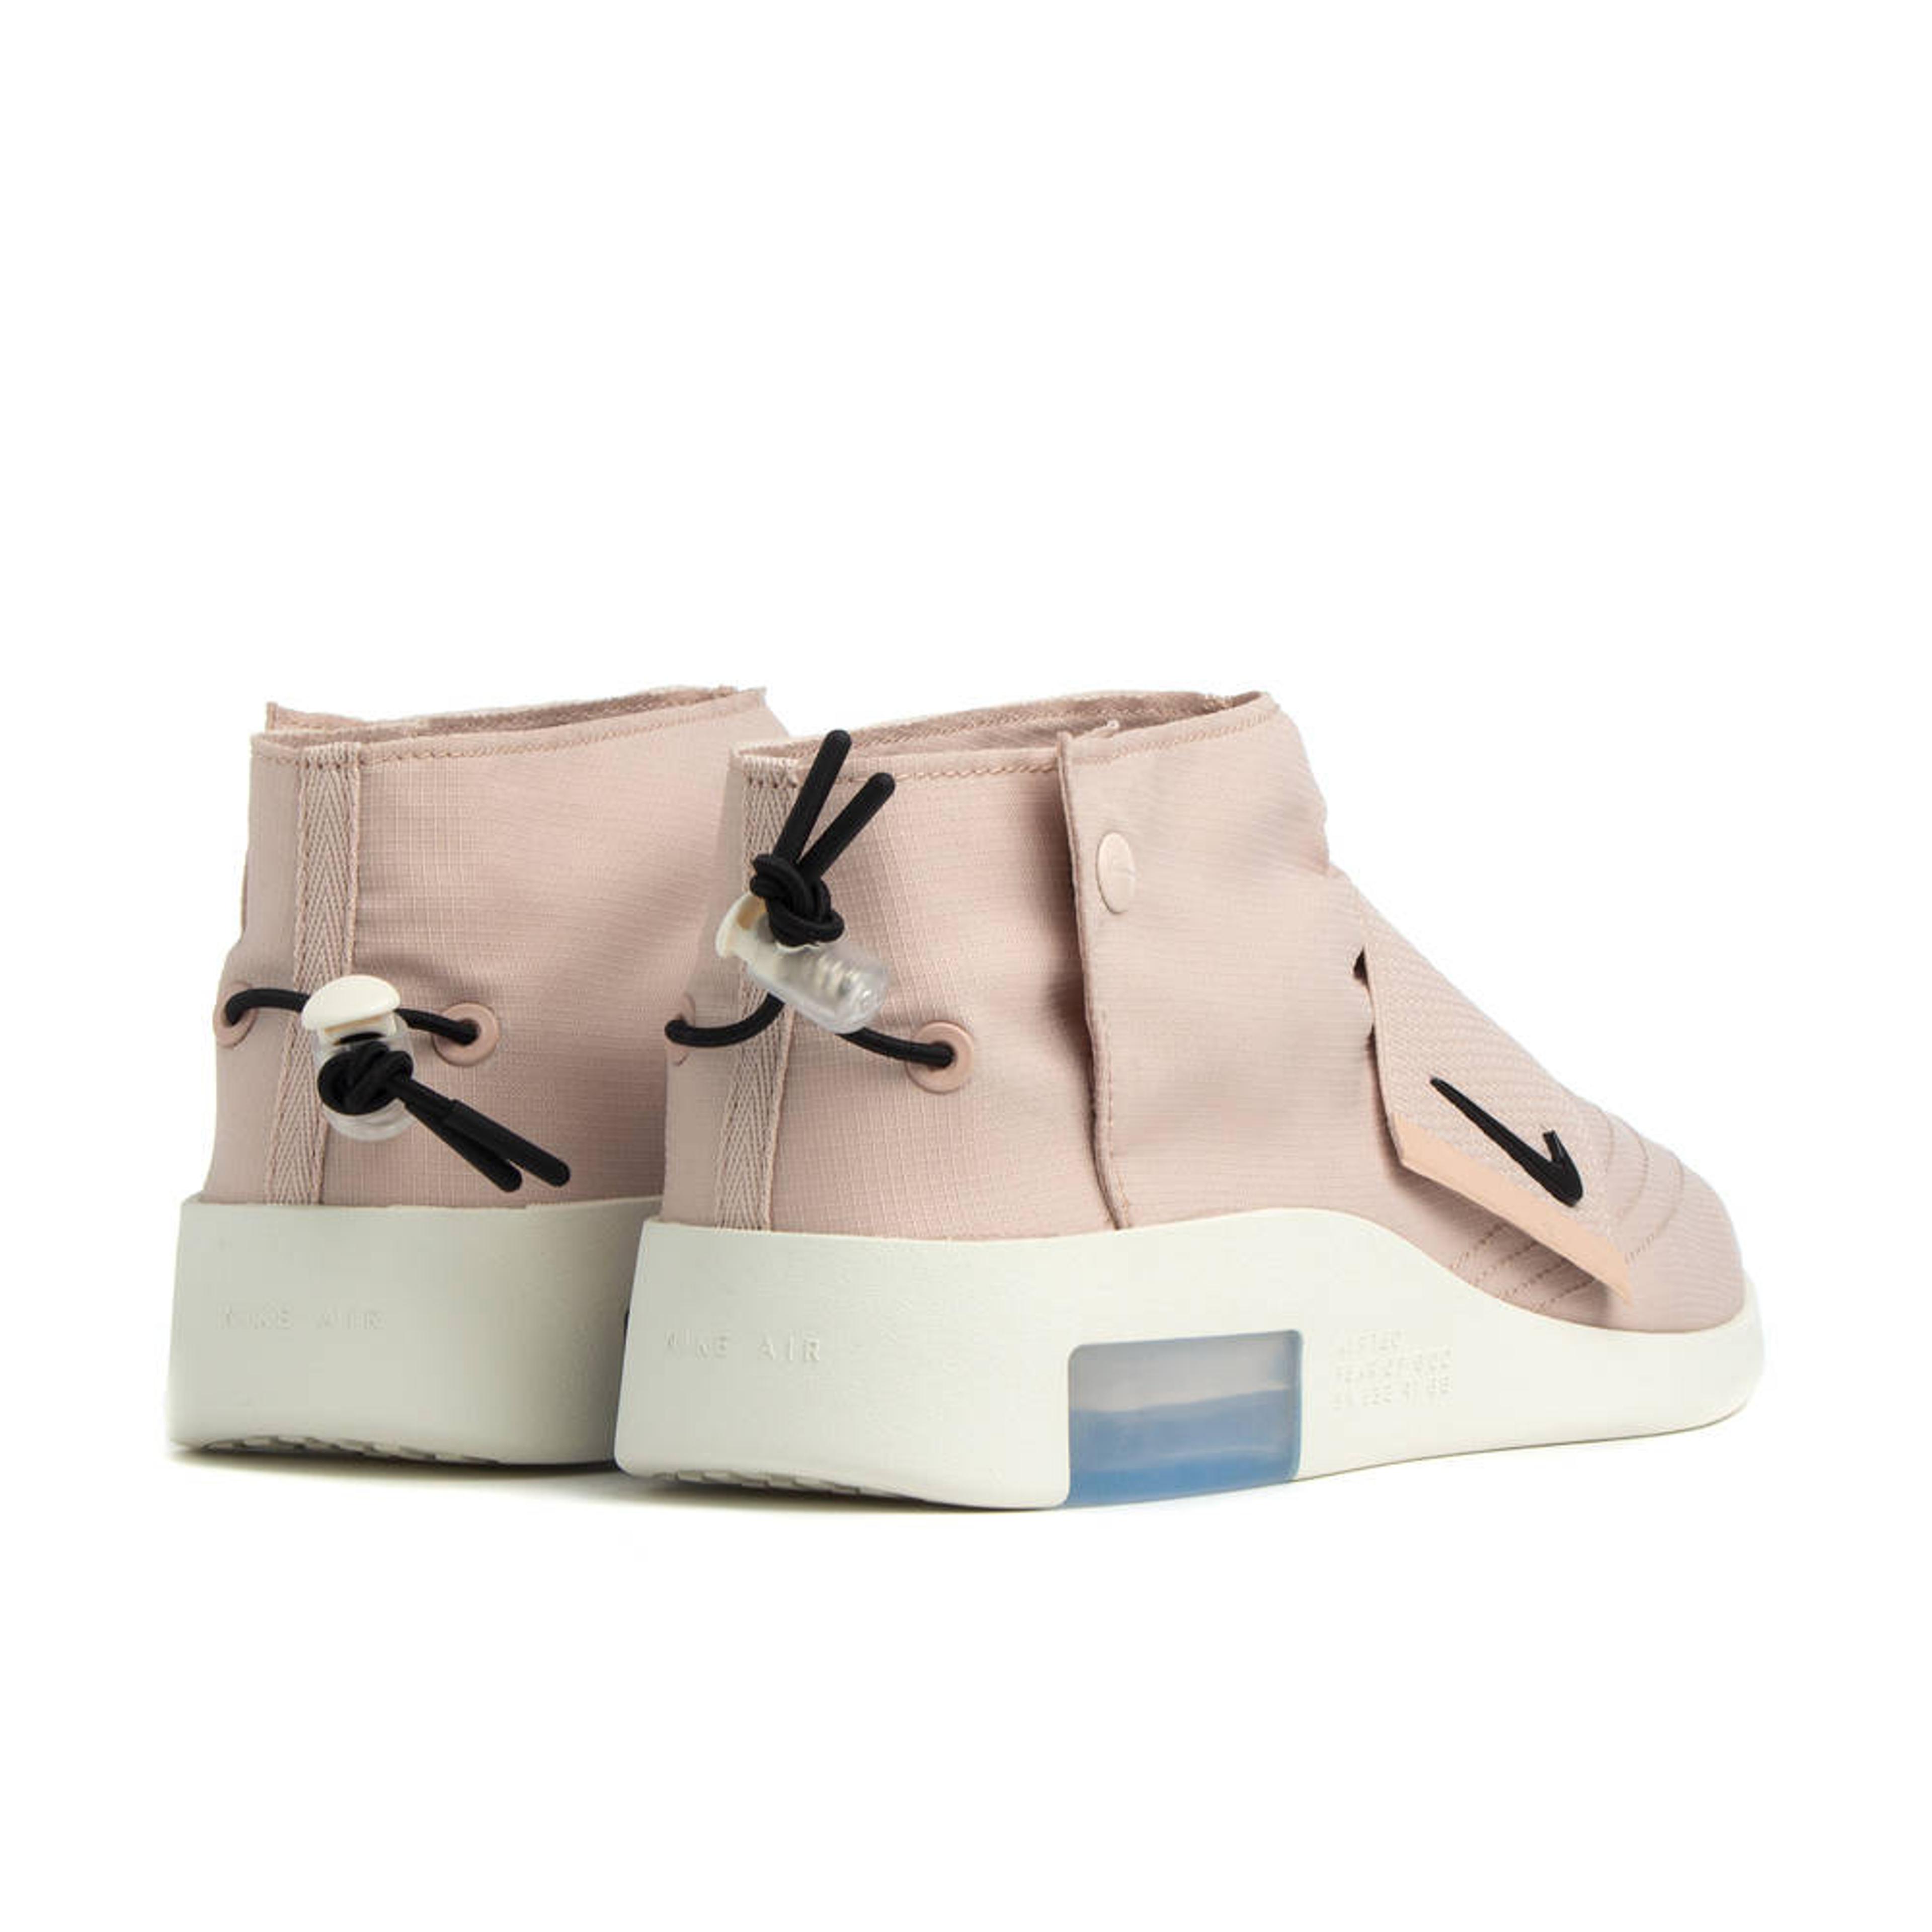 Alternate View 5 of Men's Nike Air X Fear Of God MOC "Particle Beige" AT8086 200